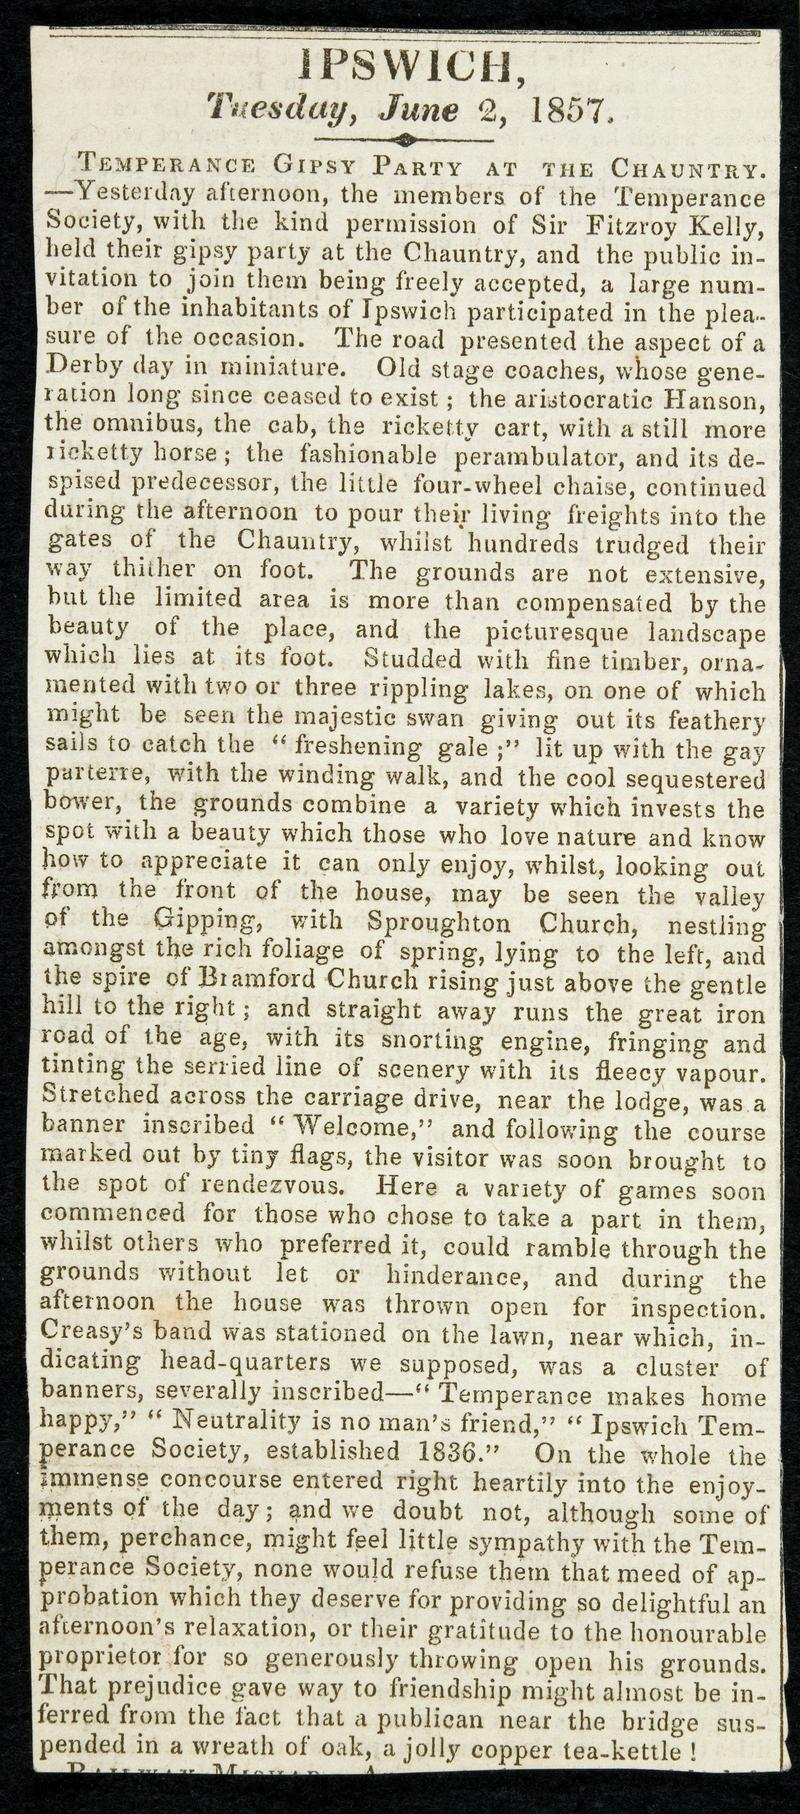 Newspaper cutting. Ipswich, Tuesday June 2nd 1857 - describing the Temperance Gipsy Party at the Chauntry.